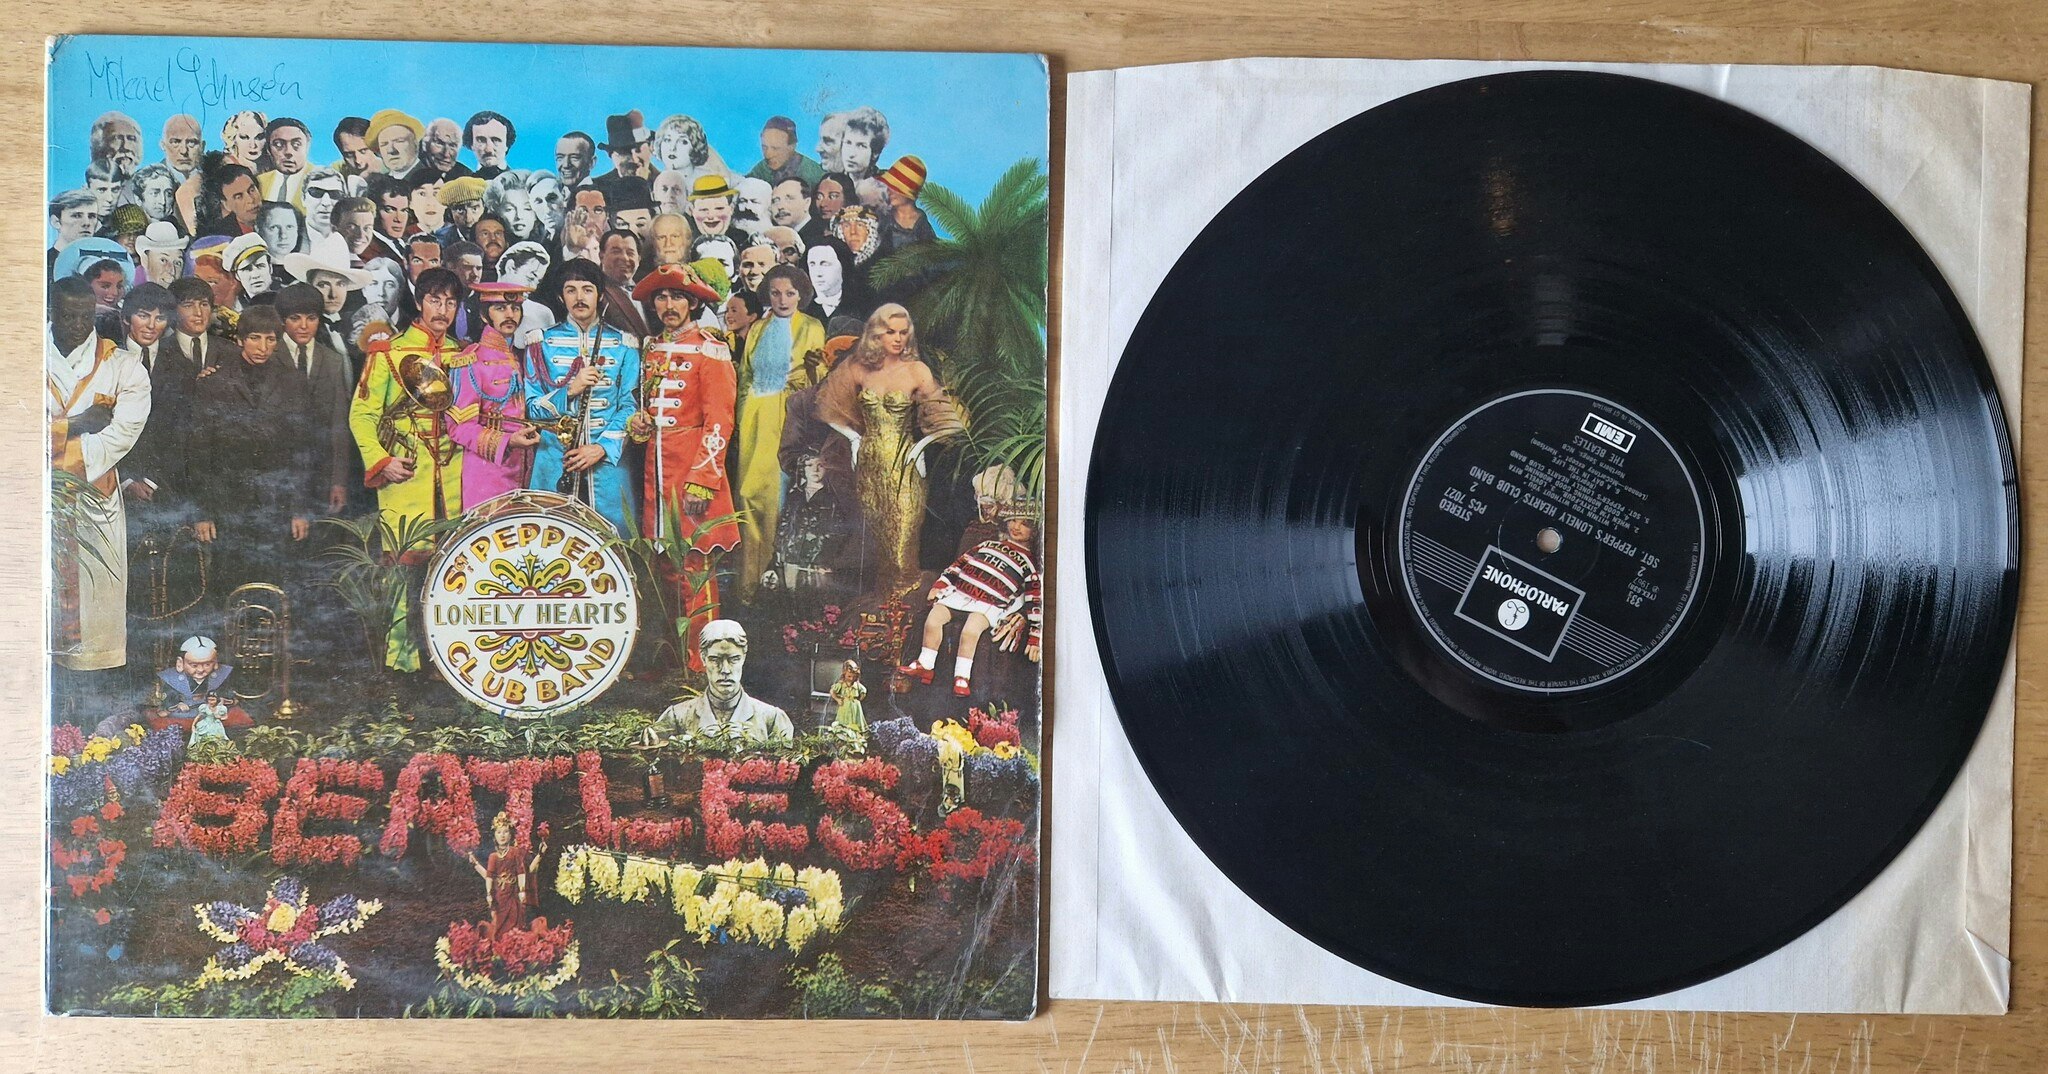 The Beatles, Sgt Peppers lonely hearts club band. Vinyl LP